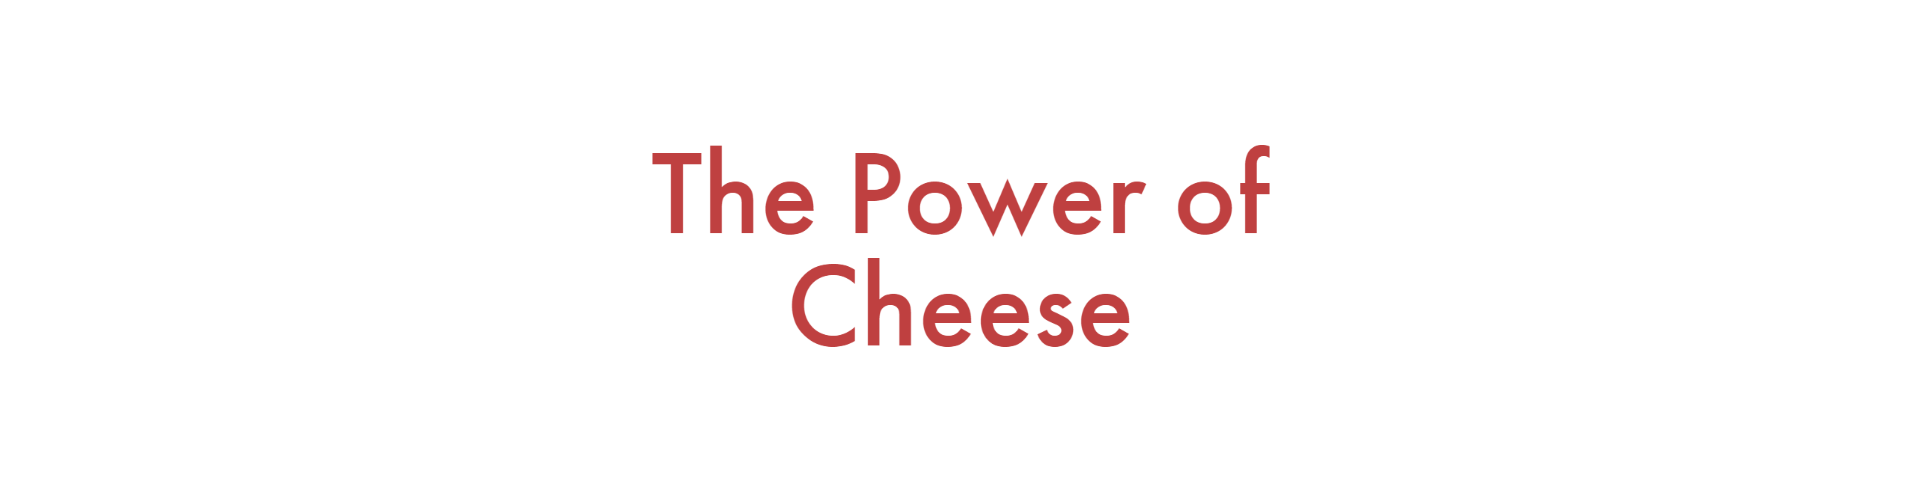 Bettering the Power of Cheese